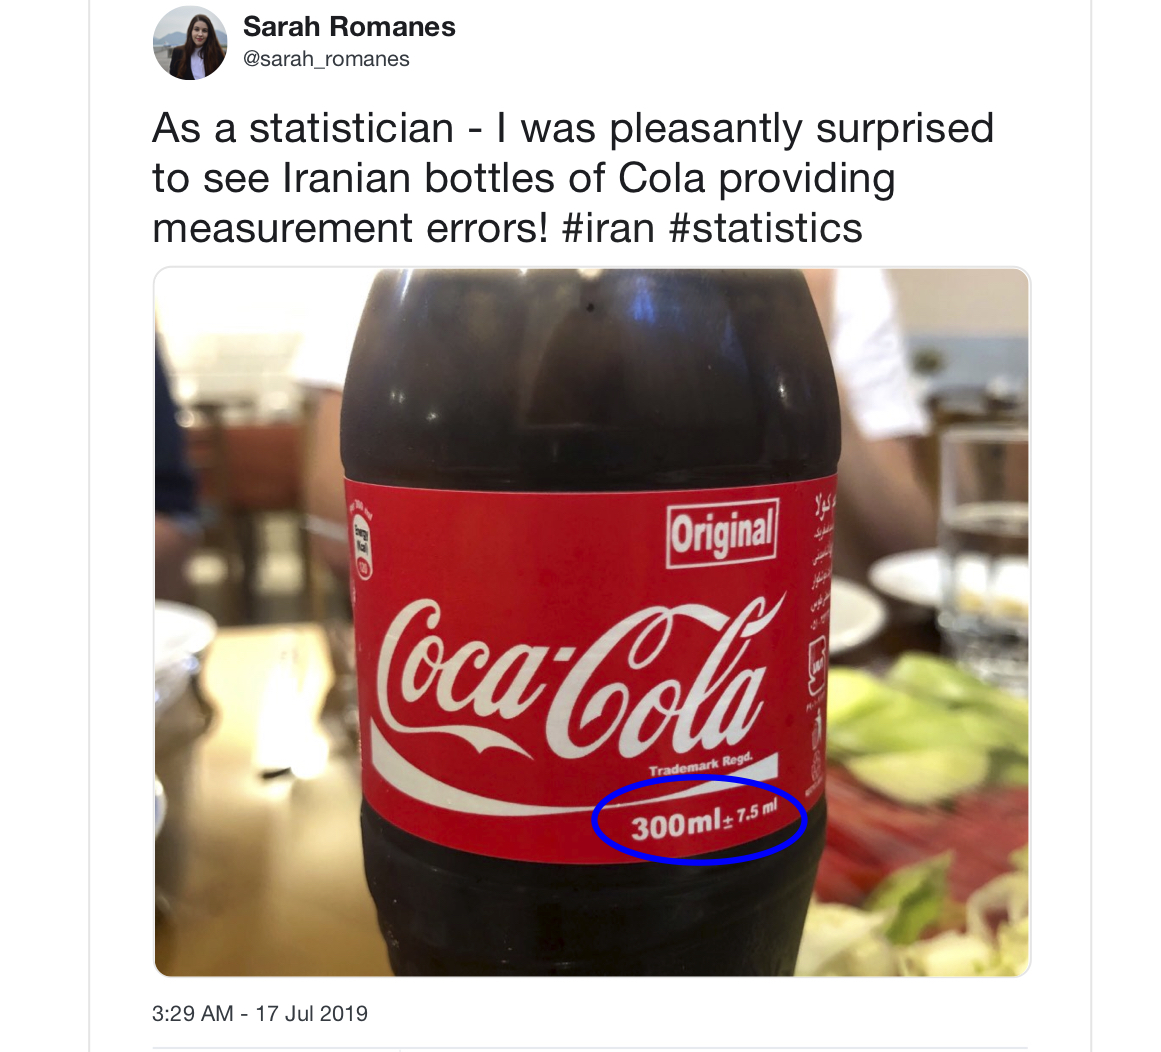 Tweet made by Sarah Romanes (@sarah_romanes). The Tweet says, ''As a statistician - I was pleasantly surprised to see Iranian bottles of Cola providing measurement errors! #iran #statistics.'' The Tweet includes an image of a bottle of Coca-Cola Coke. The bottle's fluid contents are 300 ml ±7.5 ml instead of just listing one standard size.